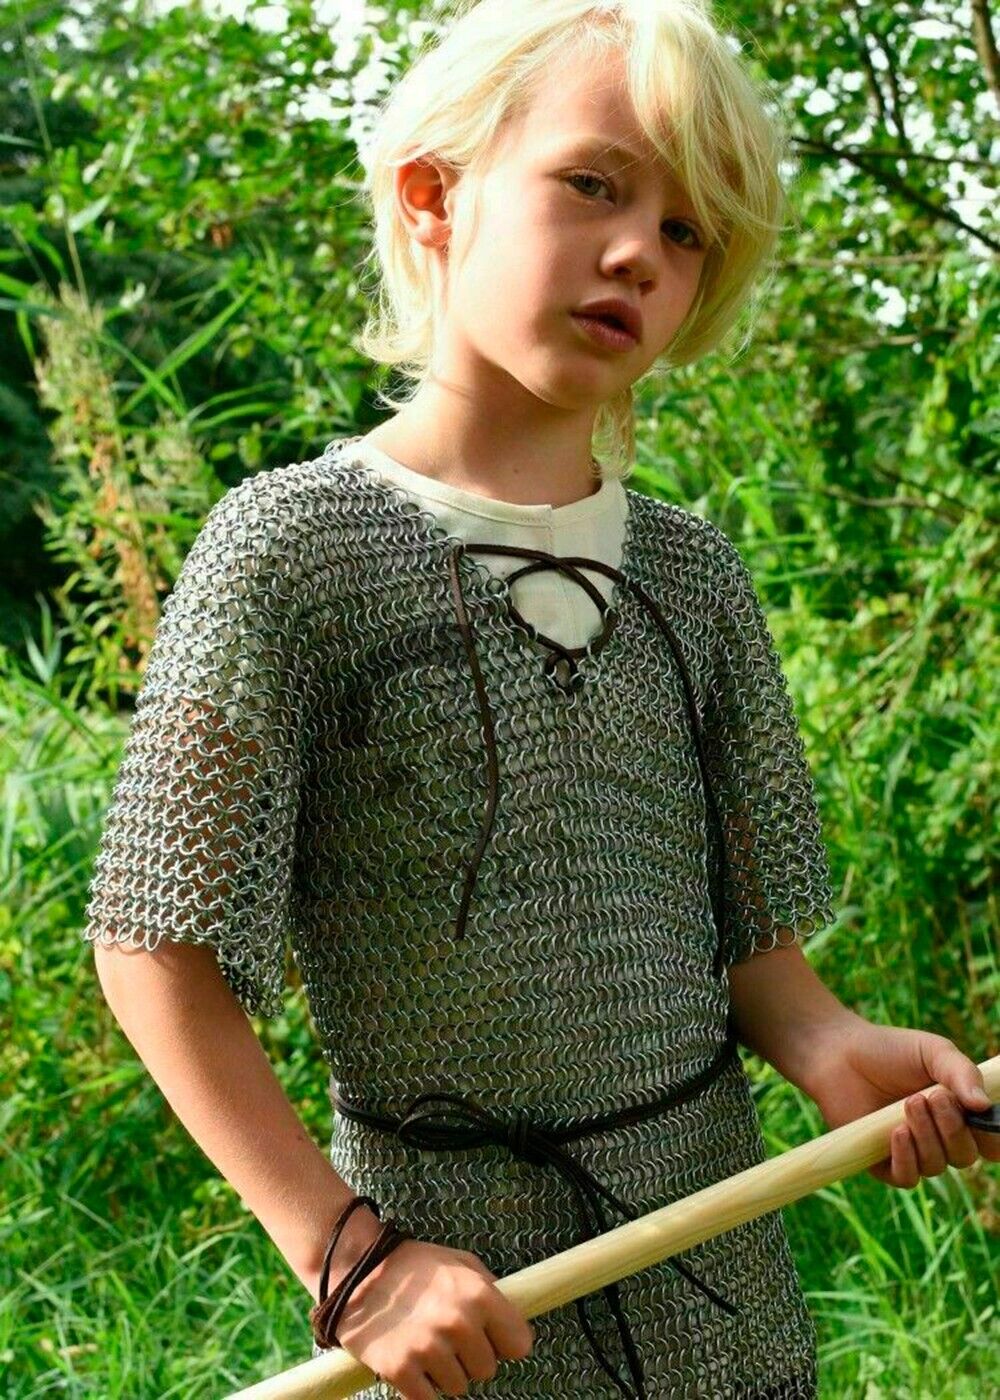 Aluminum Chainmail Shirt 10-15 yrs child Medieval Chain Mail Armor Costume Gift